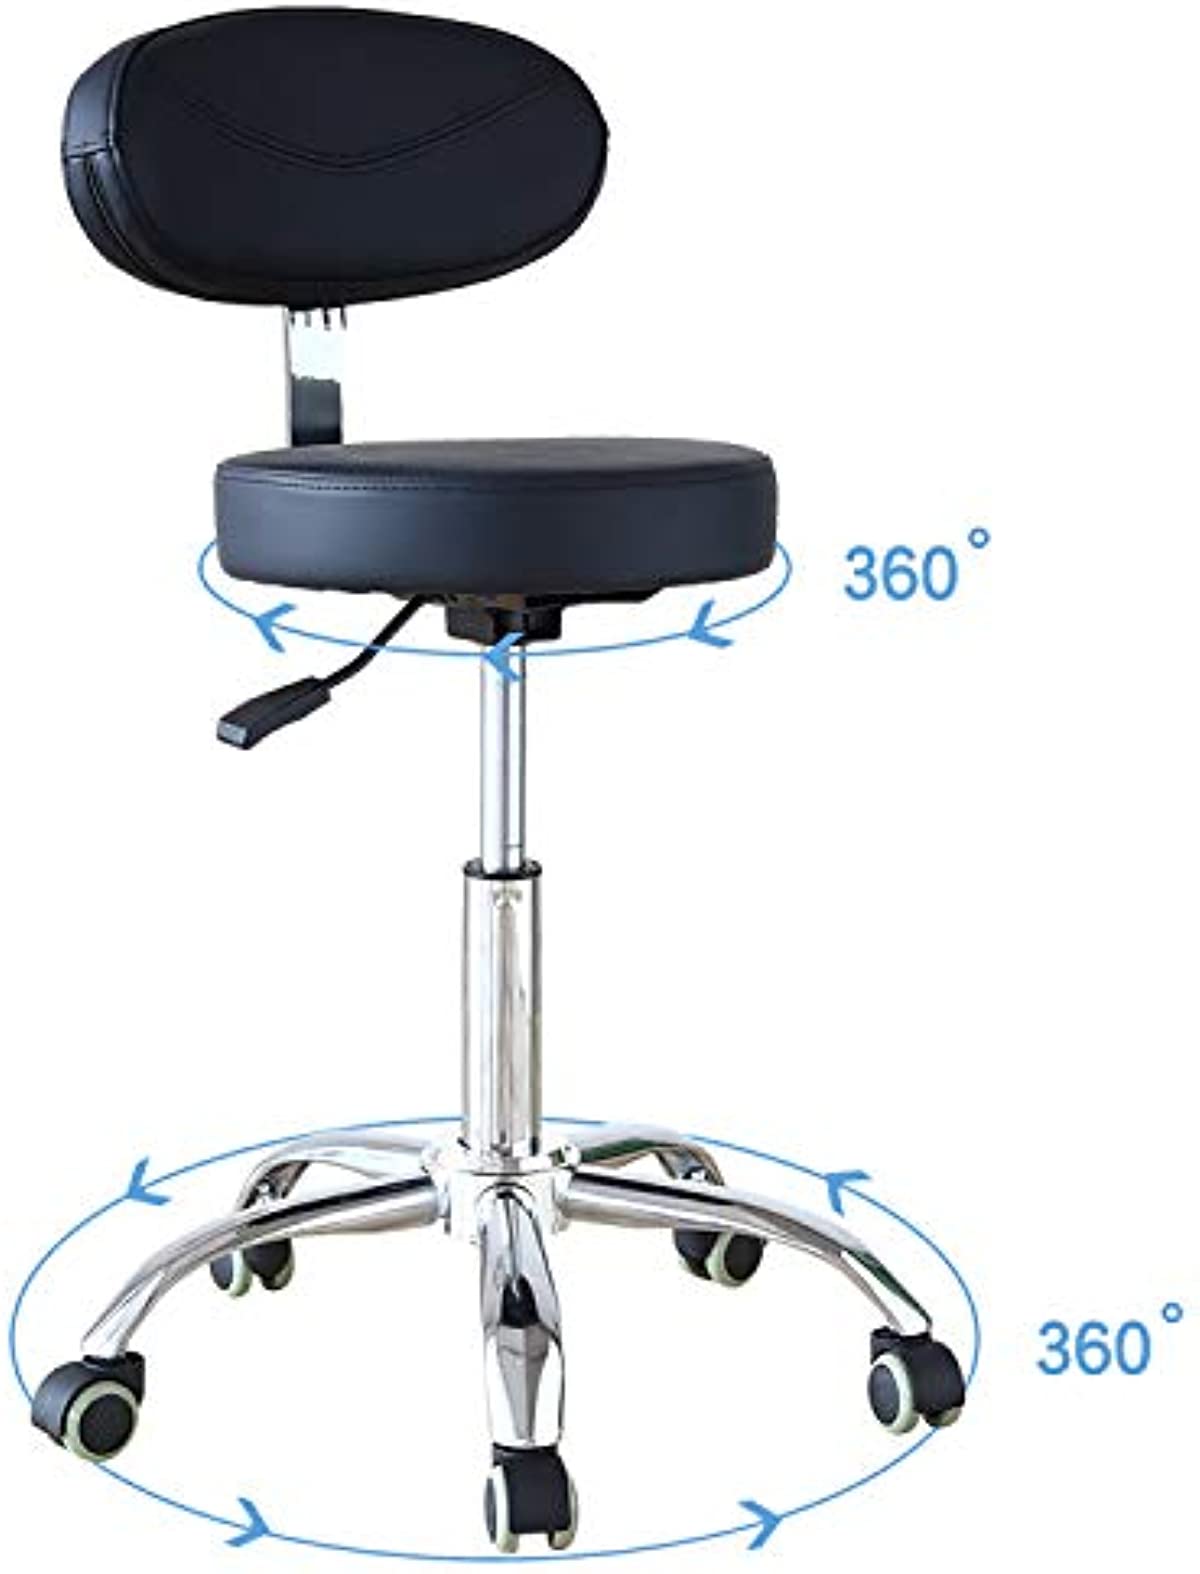 FOHGFNT Drafting Adjustable Rolling Swivel Stool Chair for Massage Facial Beauty Salon Spa Medical Dental Clinic Home Office with Backrest and Wheels,Black